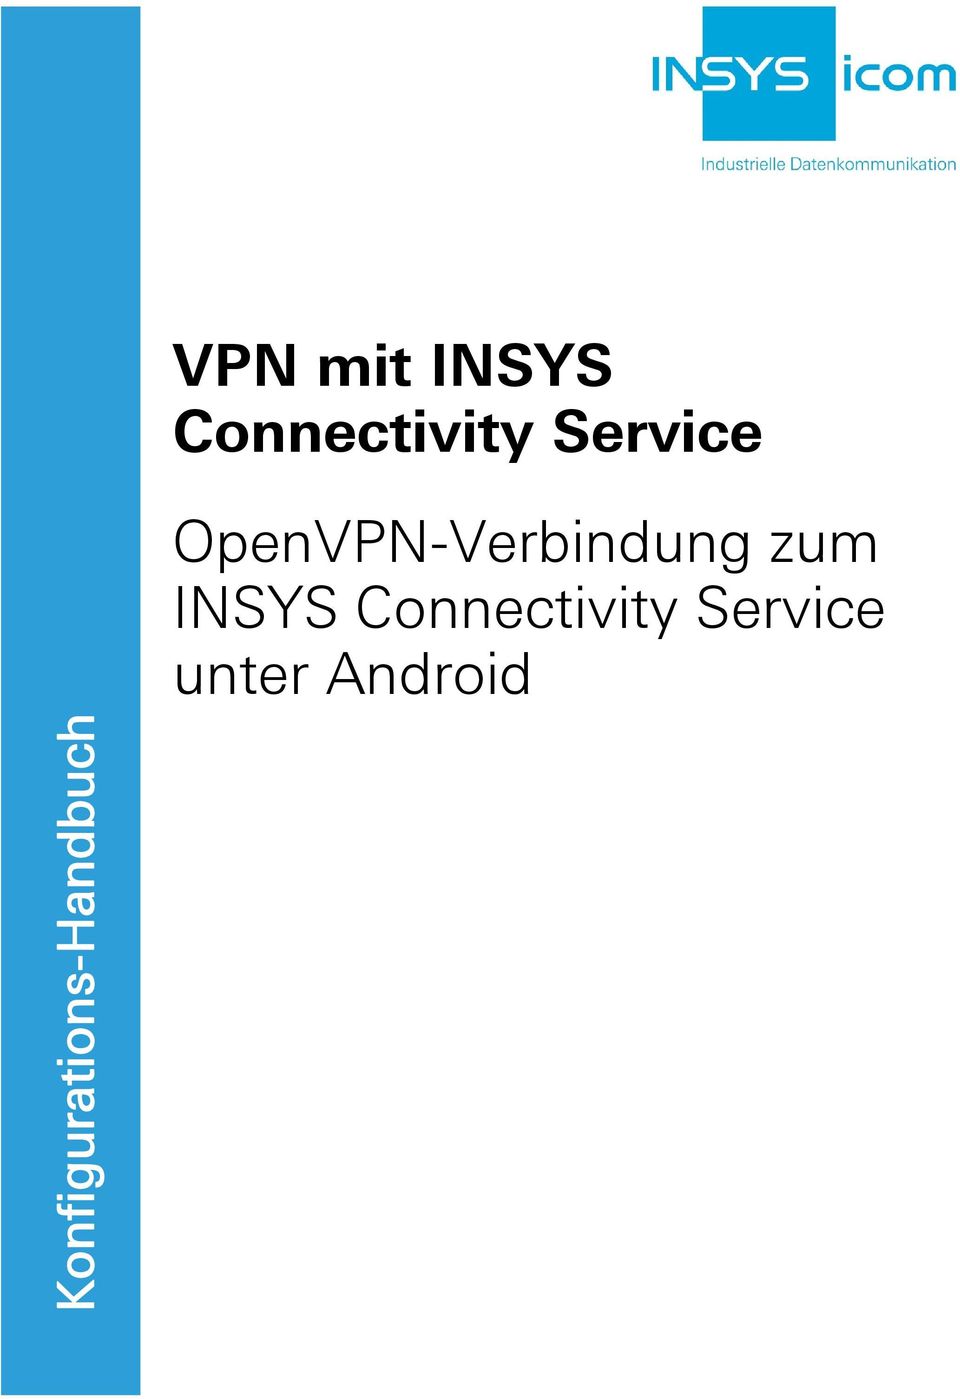 INSYS Connectivity Service